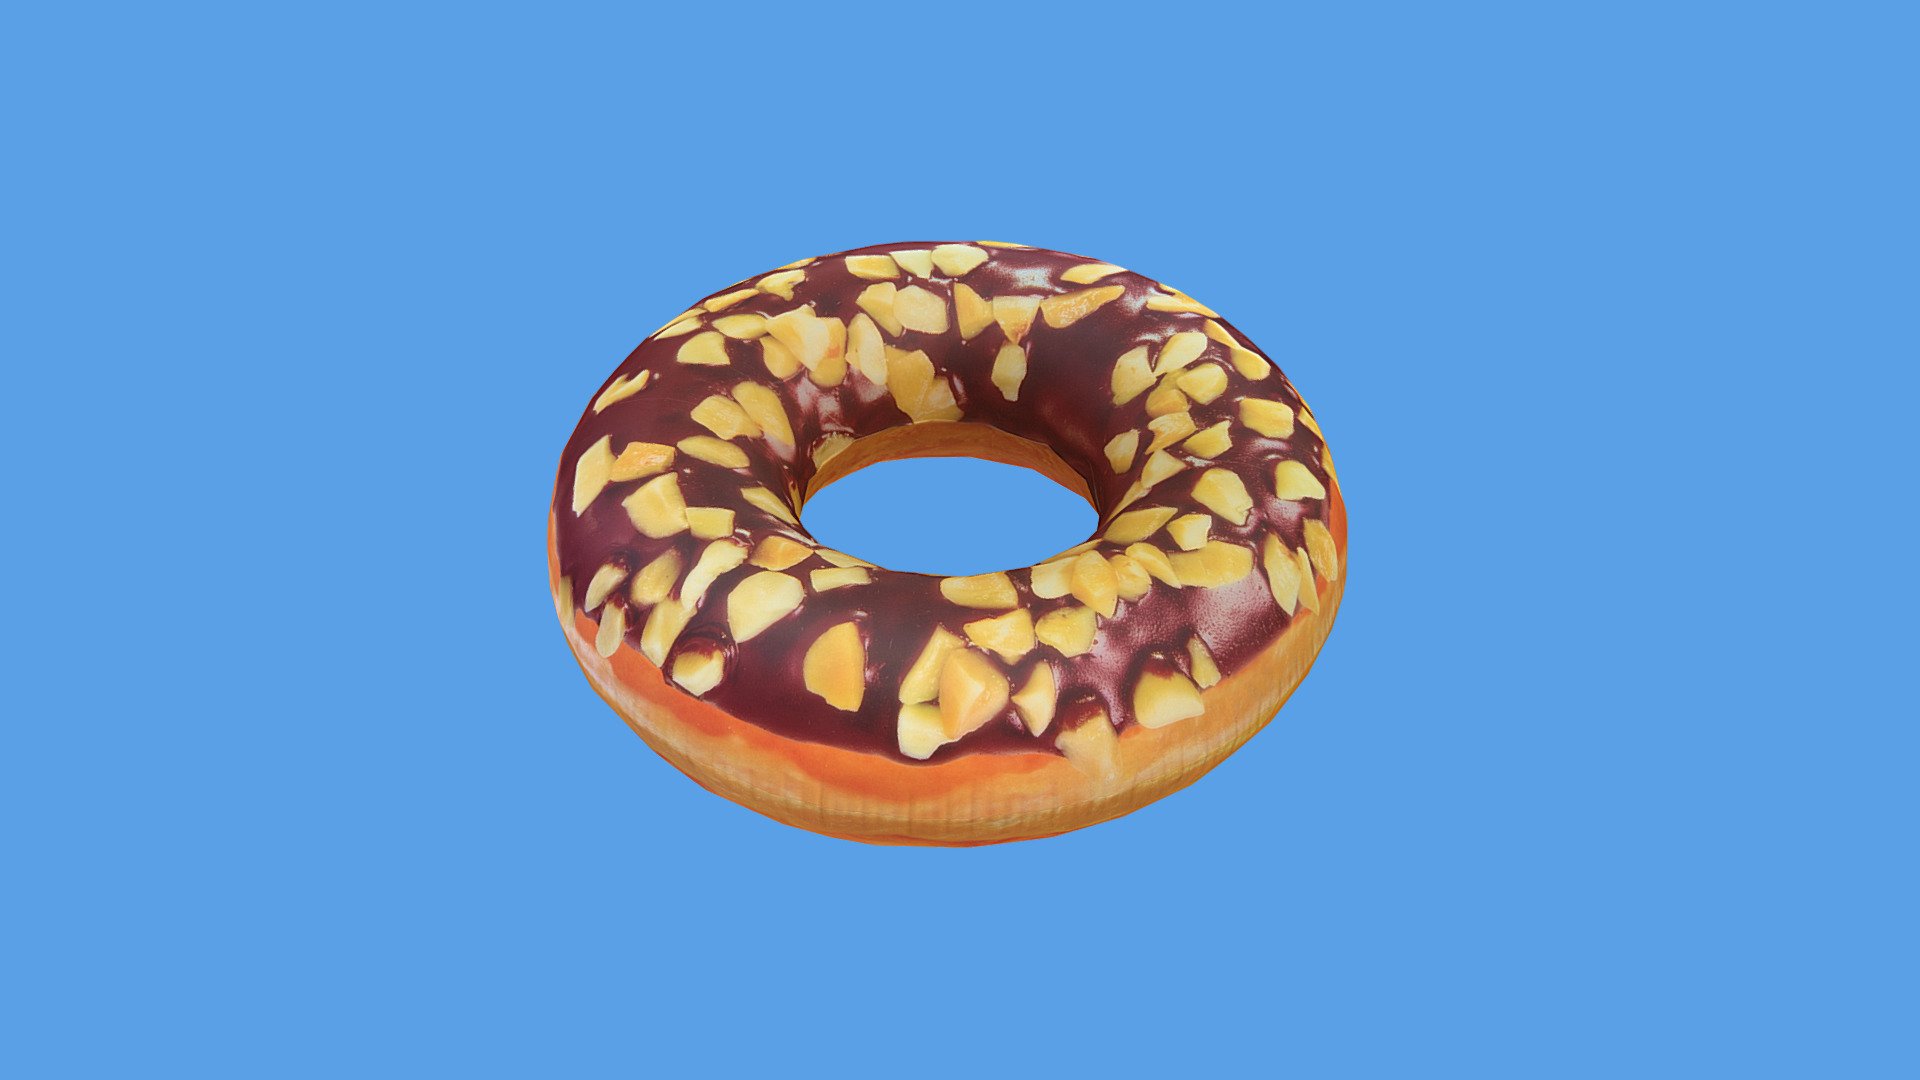 A donut buoy scanned during Thomas 3D scanning workshops, at Sketchfab's team event!

————————————————————————————————————————————————————————————— 

DOWNLOAD — Also available for dowload: sketchfab.com/louis/store

Want to learn more about the technical details of this model? Use Sketchfab's model inspector. Protip, just press &ldquo;I